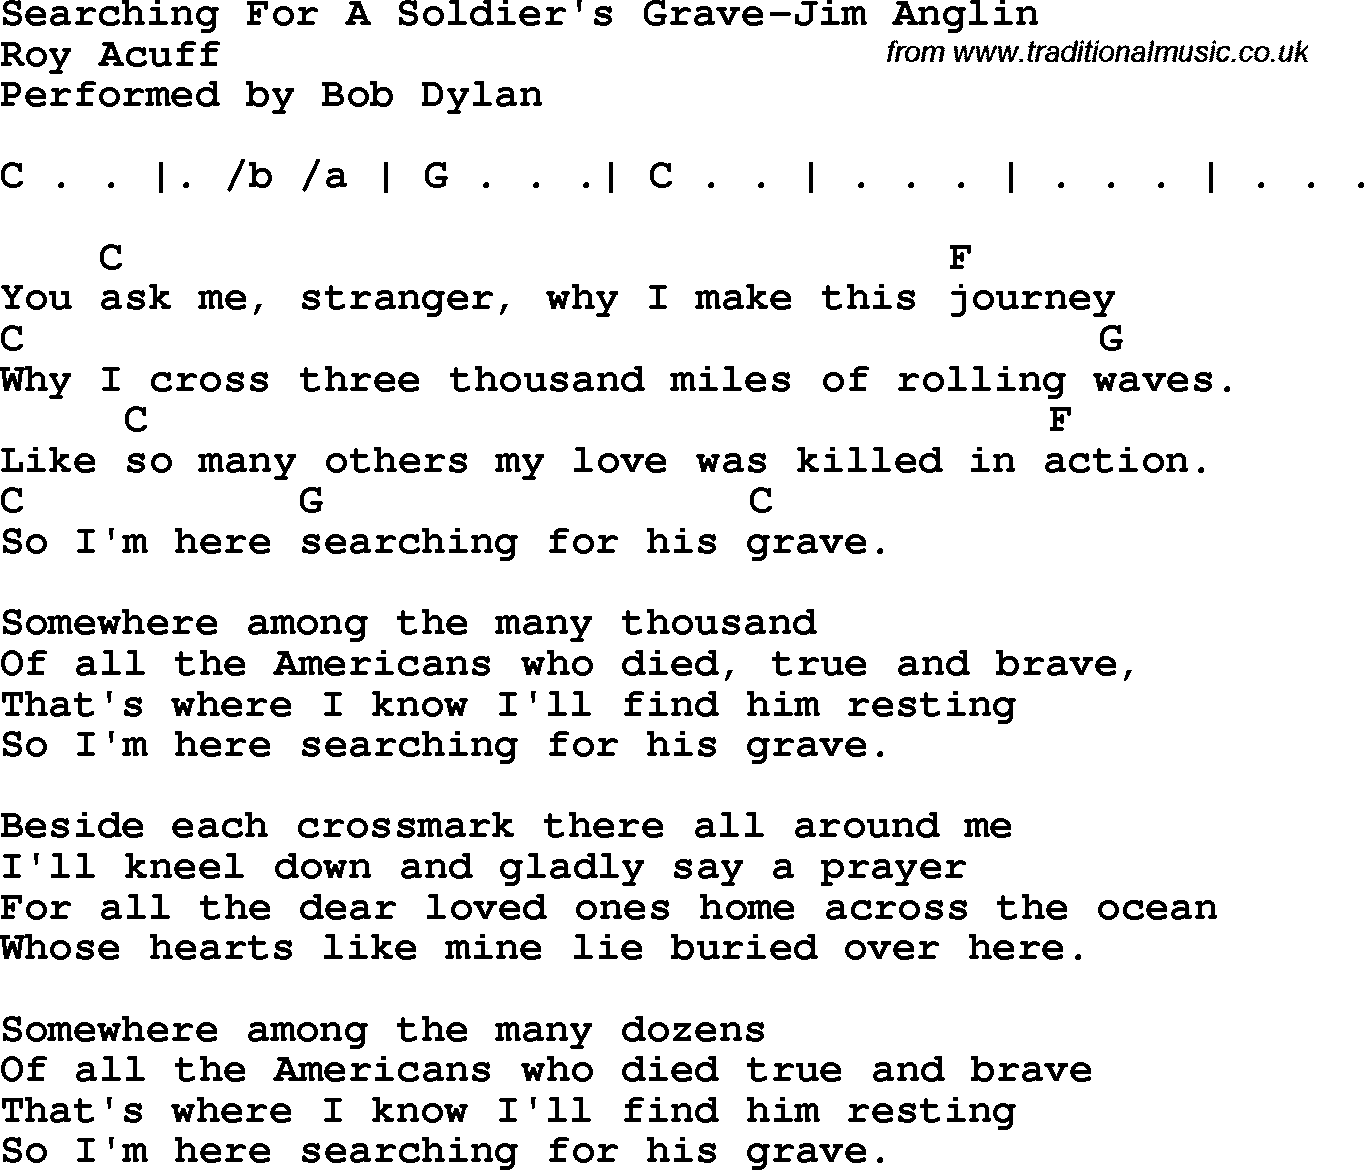 Protest Song Searching For A Soldier's Grave-Jim Anglin lyrics and chords